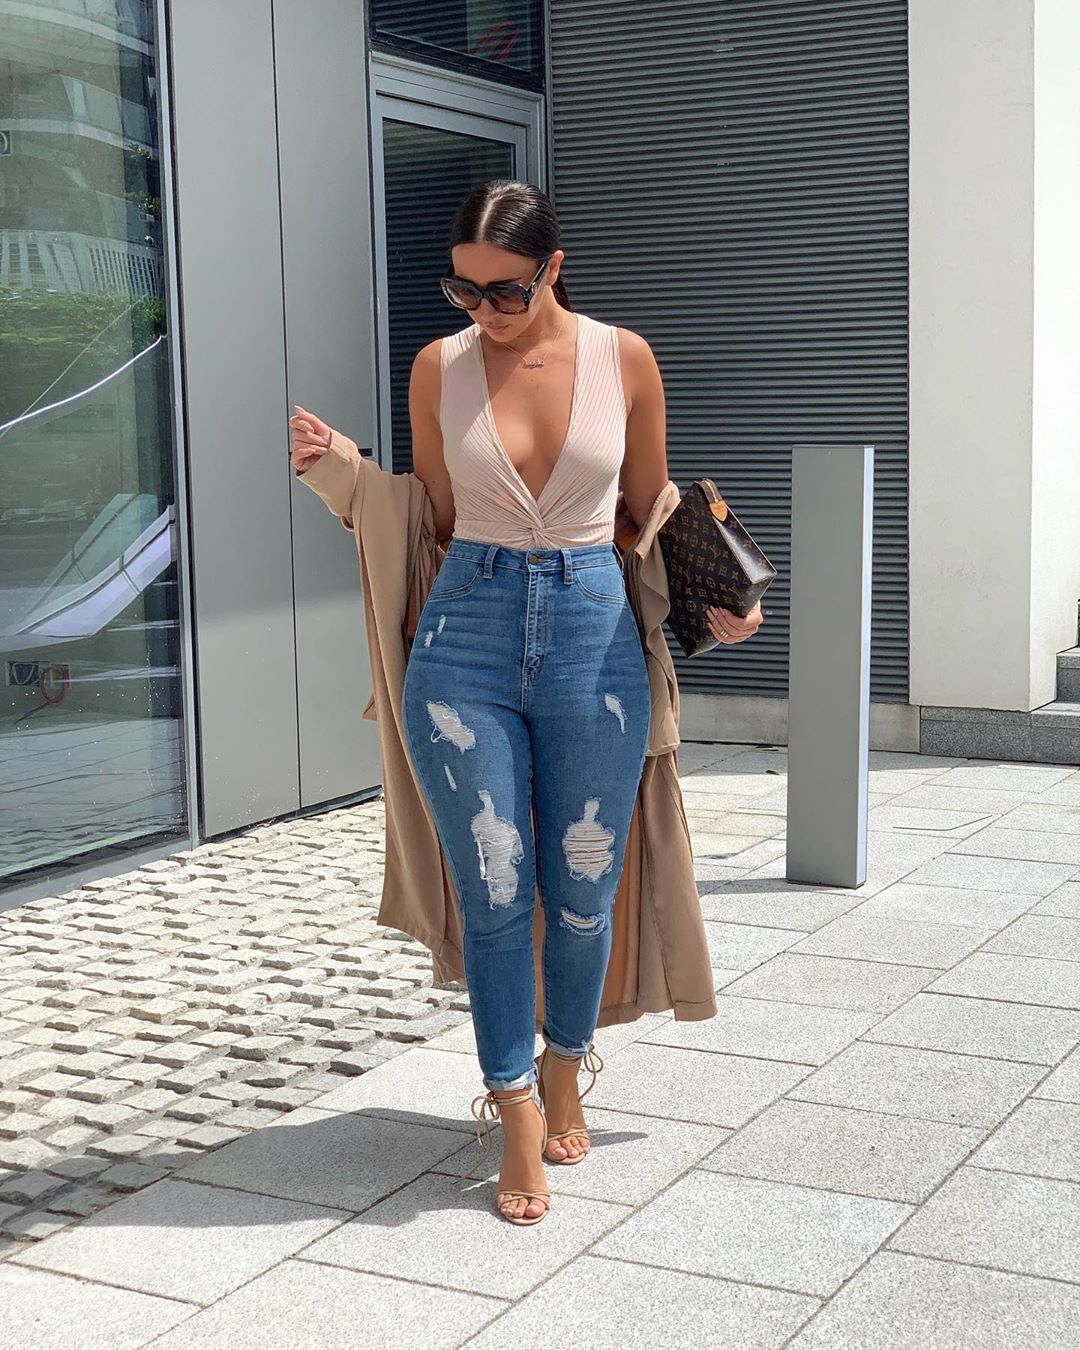 RUBY FAIRS on Instagram: “Outfit @publicdesire Choose @klarna.uk in the Checkout & Pay up to 30 days later or in 3 instalments👌🏼💁🏻‍♀️ #klarnait #publicdesire #klarna…”